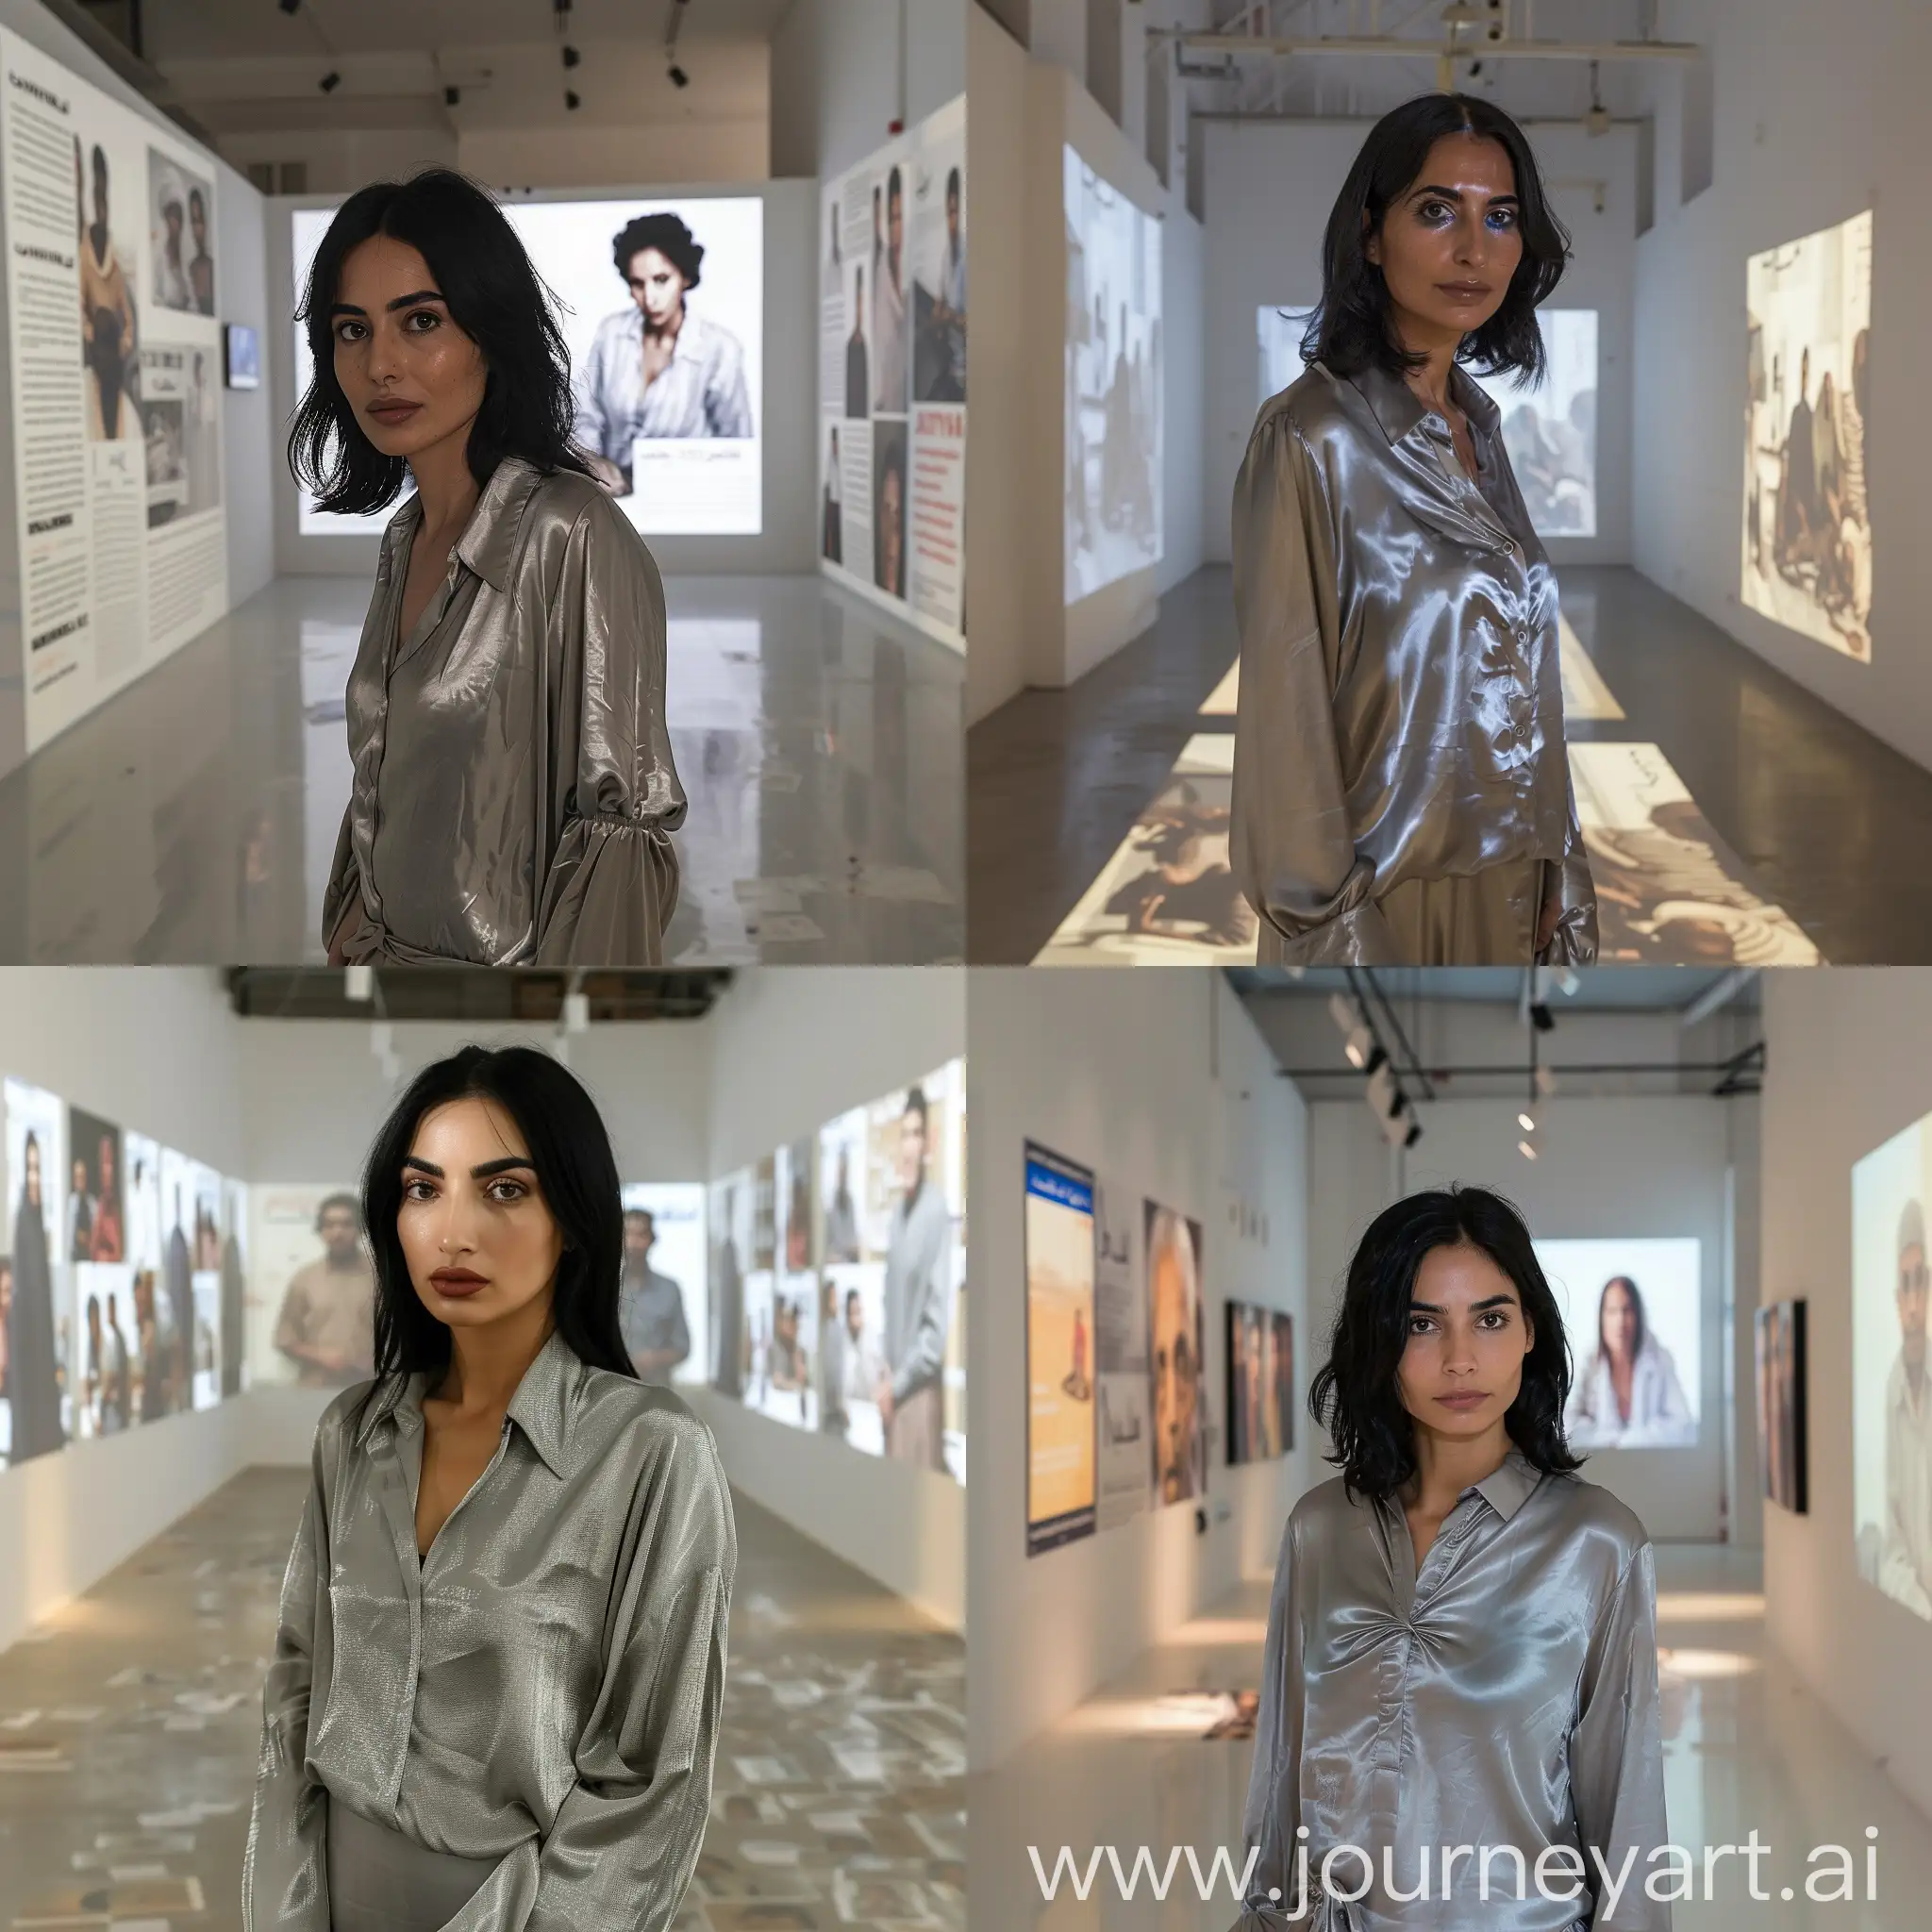 Viewed from the front, a 35-year-old beautiful arab woman with medium-length black hair and a silk grey shirt isin the middle of an mepty big gallery long white walls and on the wall and floor sueprposed projection of Tunsian poor people and news about poverty. 